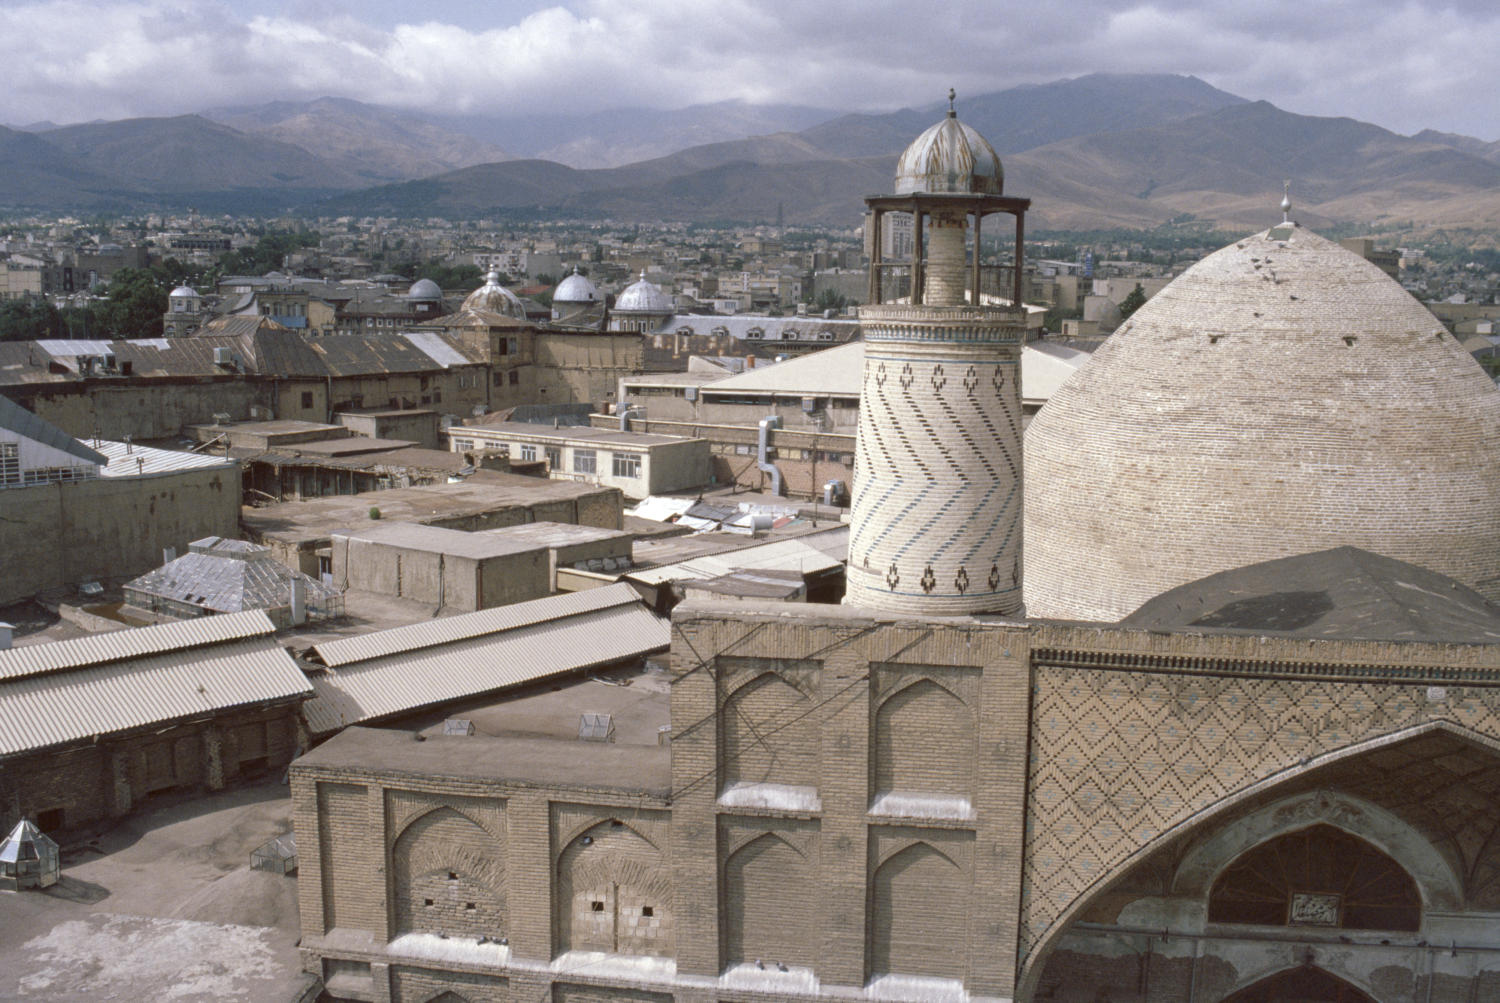 View of dome and minaret of qibla iwan seen from opposite rooftop. The bazaar of Hamadan is visible in the background.